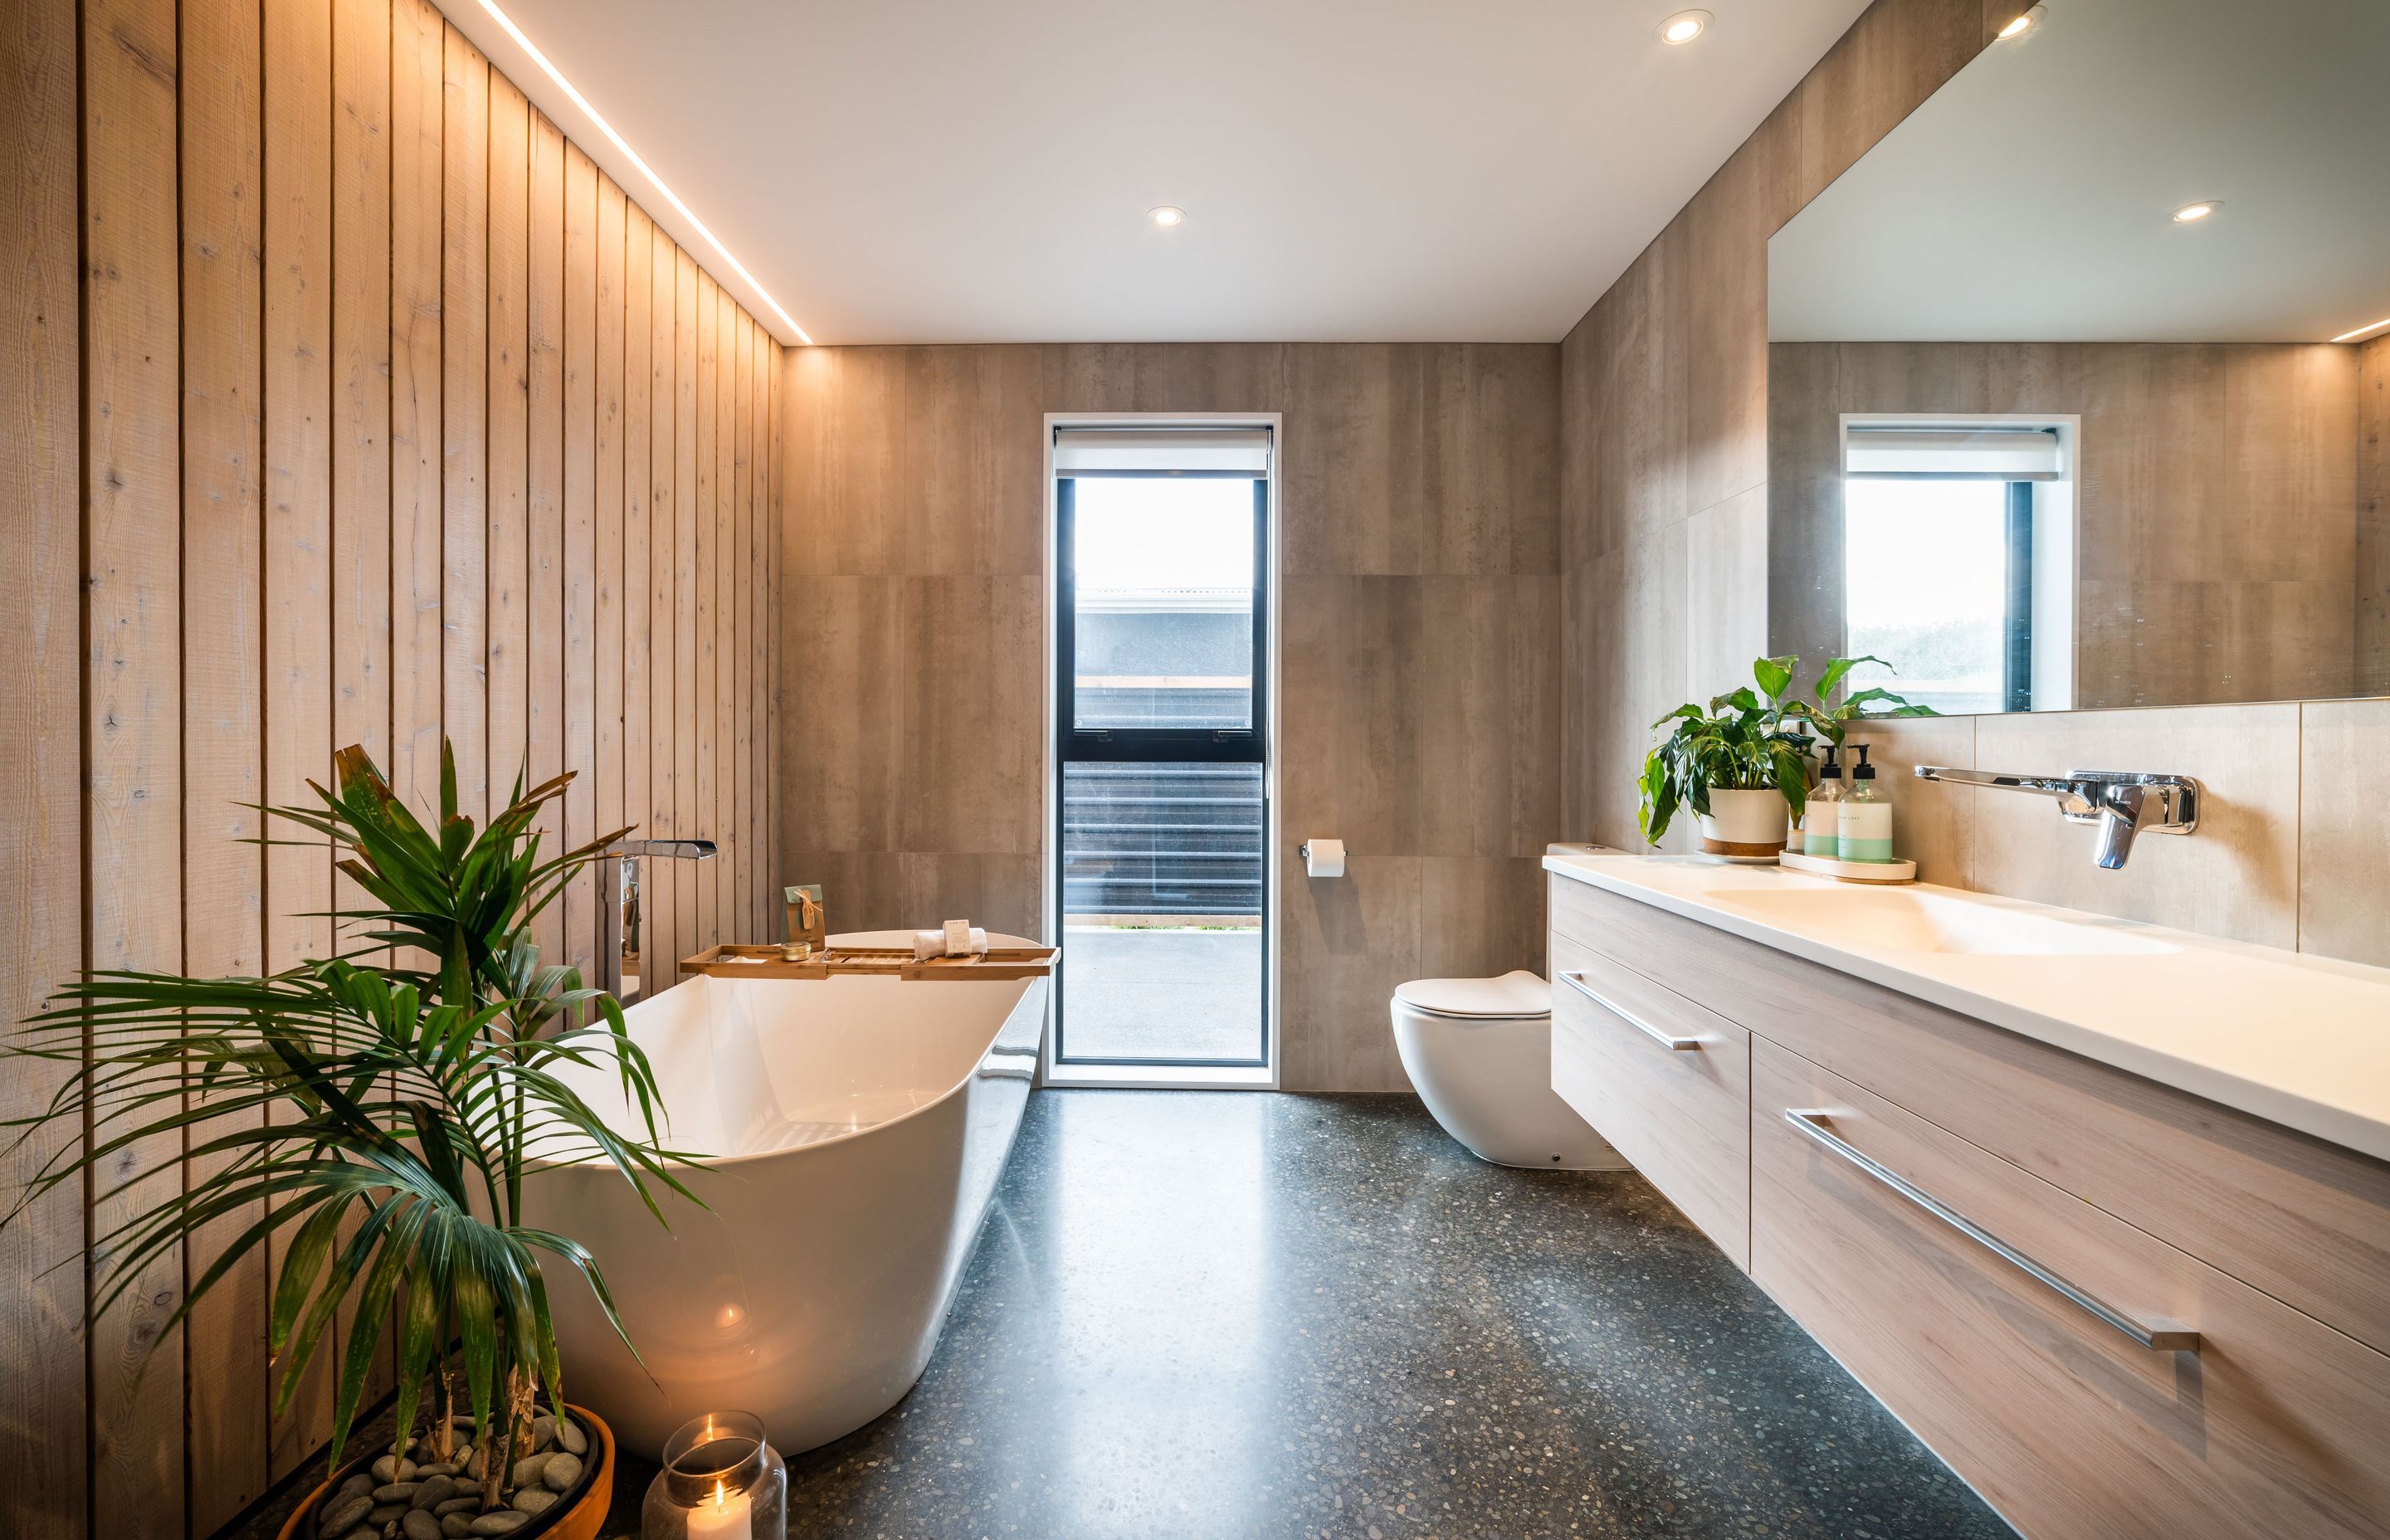 The main bathroom on the lower level features larch and tiles continuing the colour and material palette of the rest of the house. 